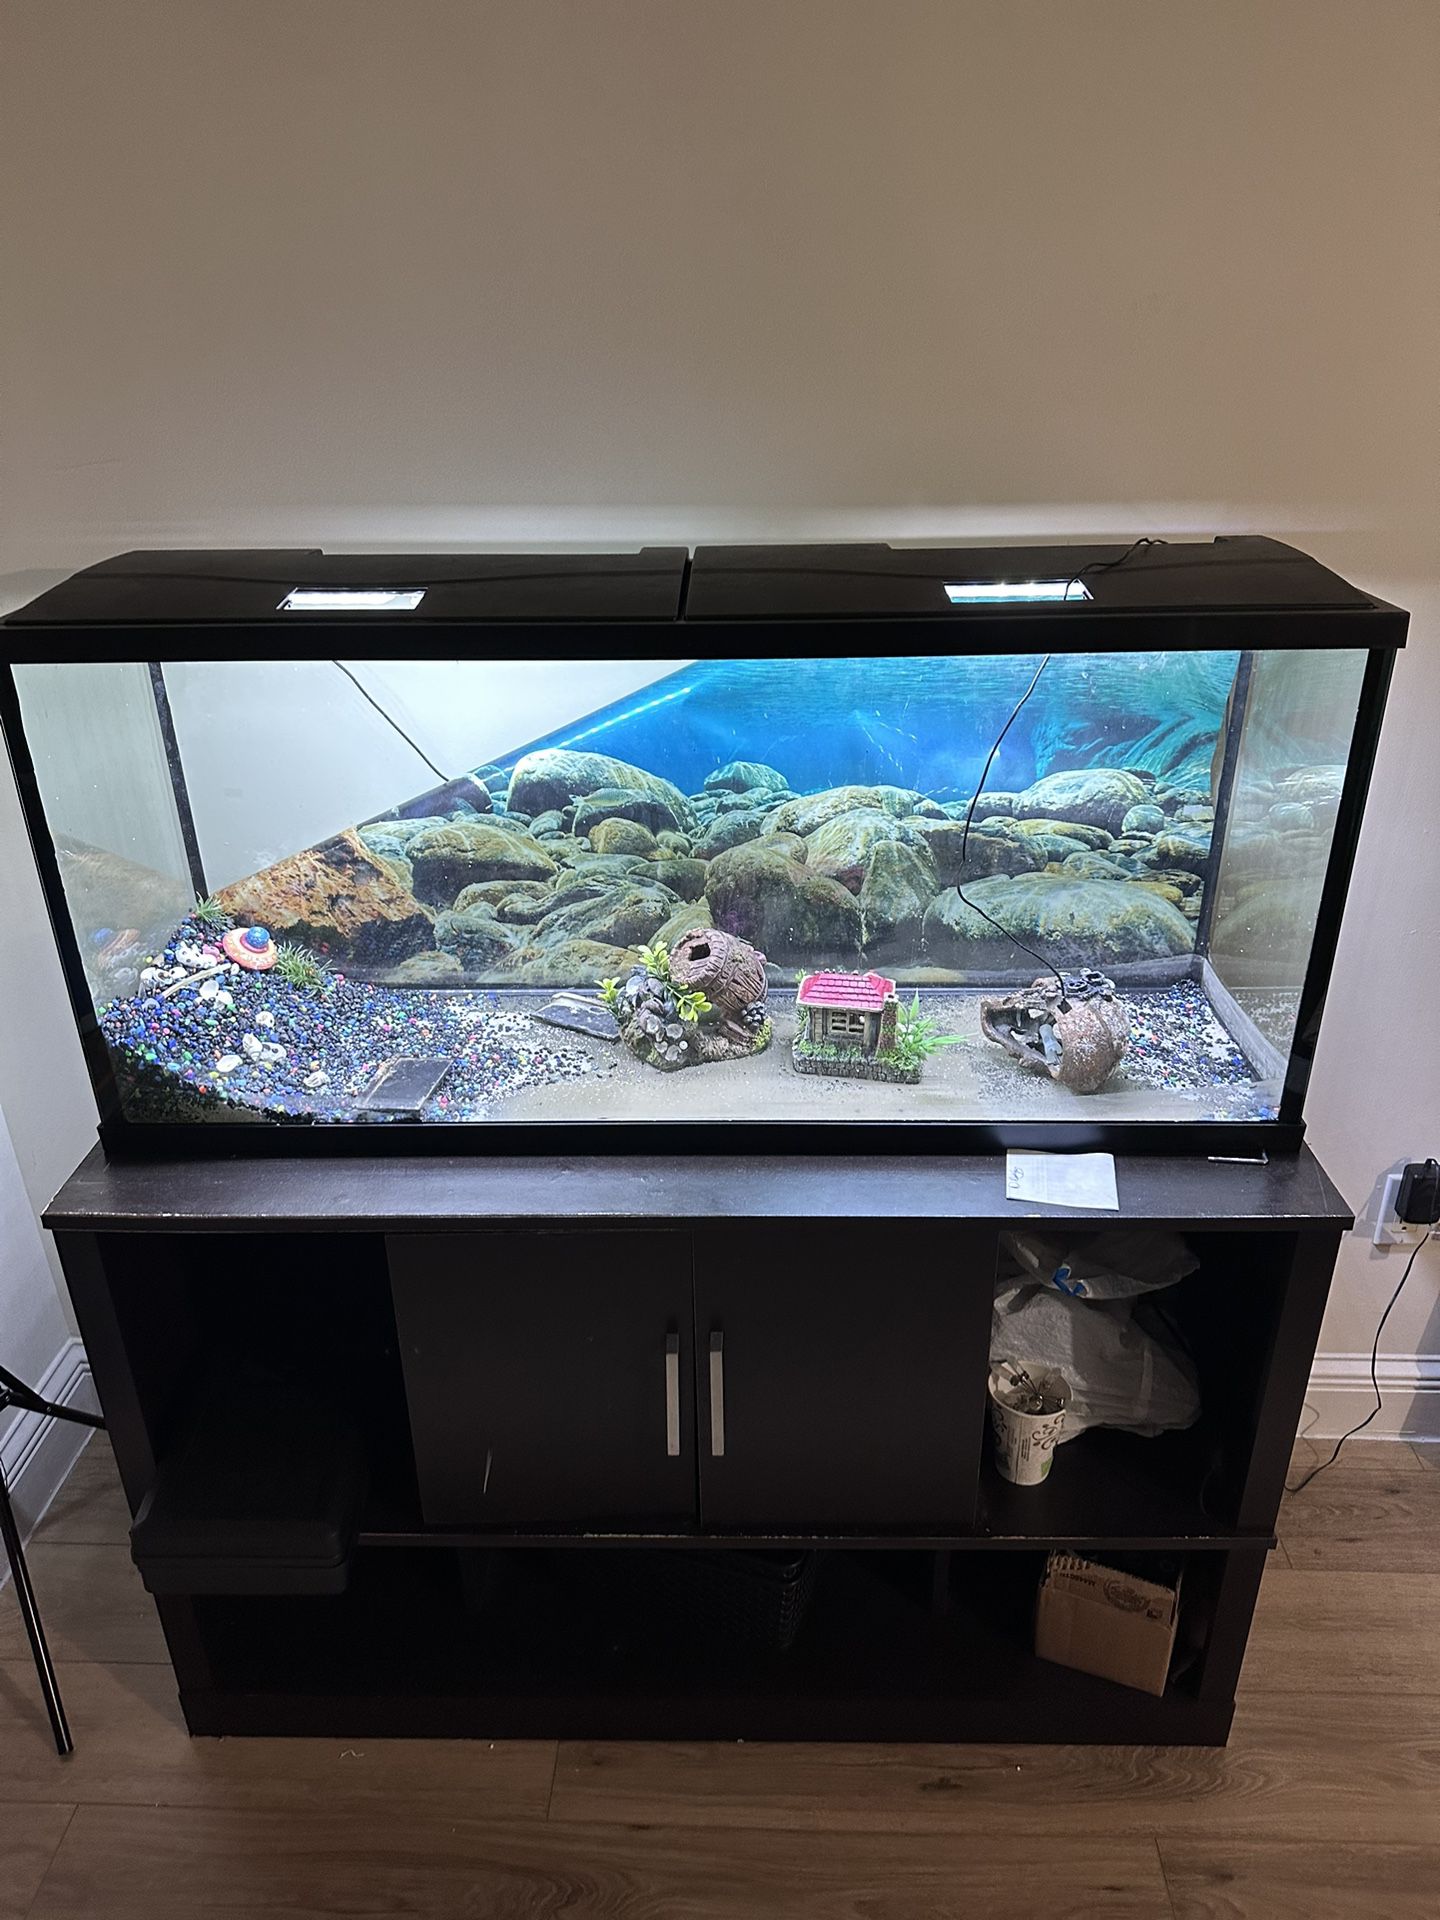 60 gallon fish tank with stand